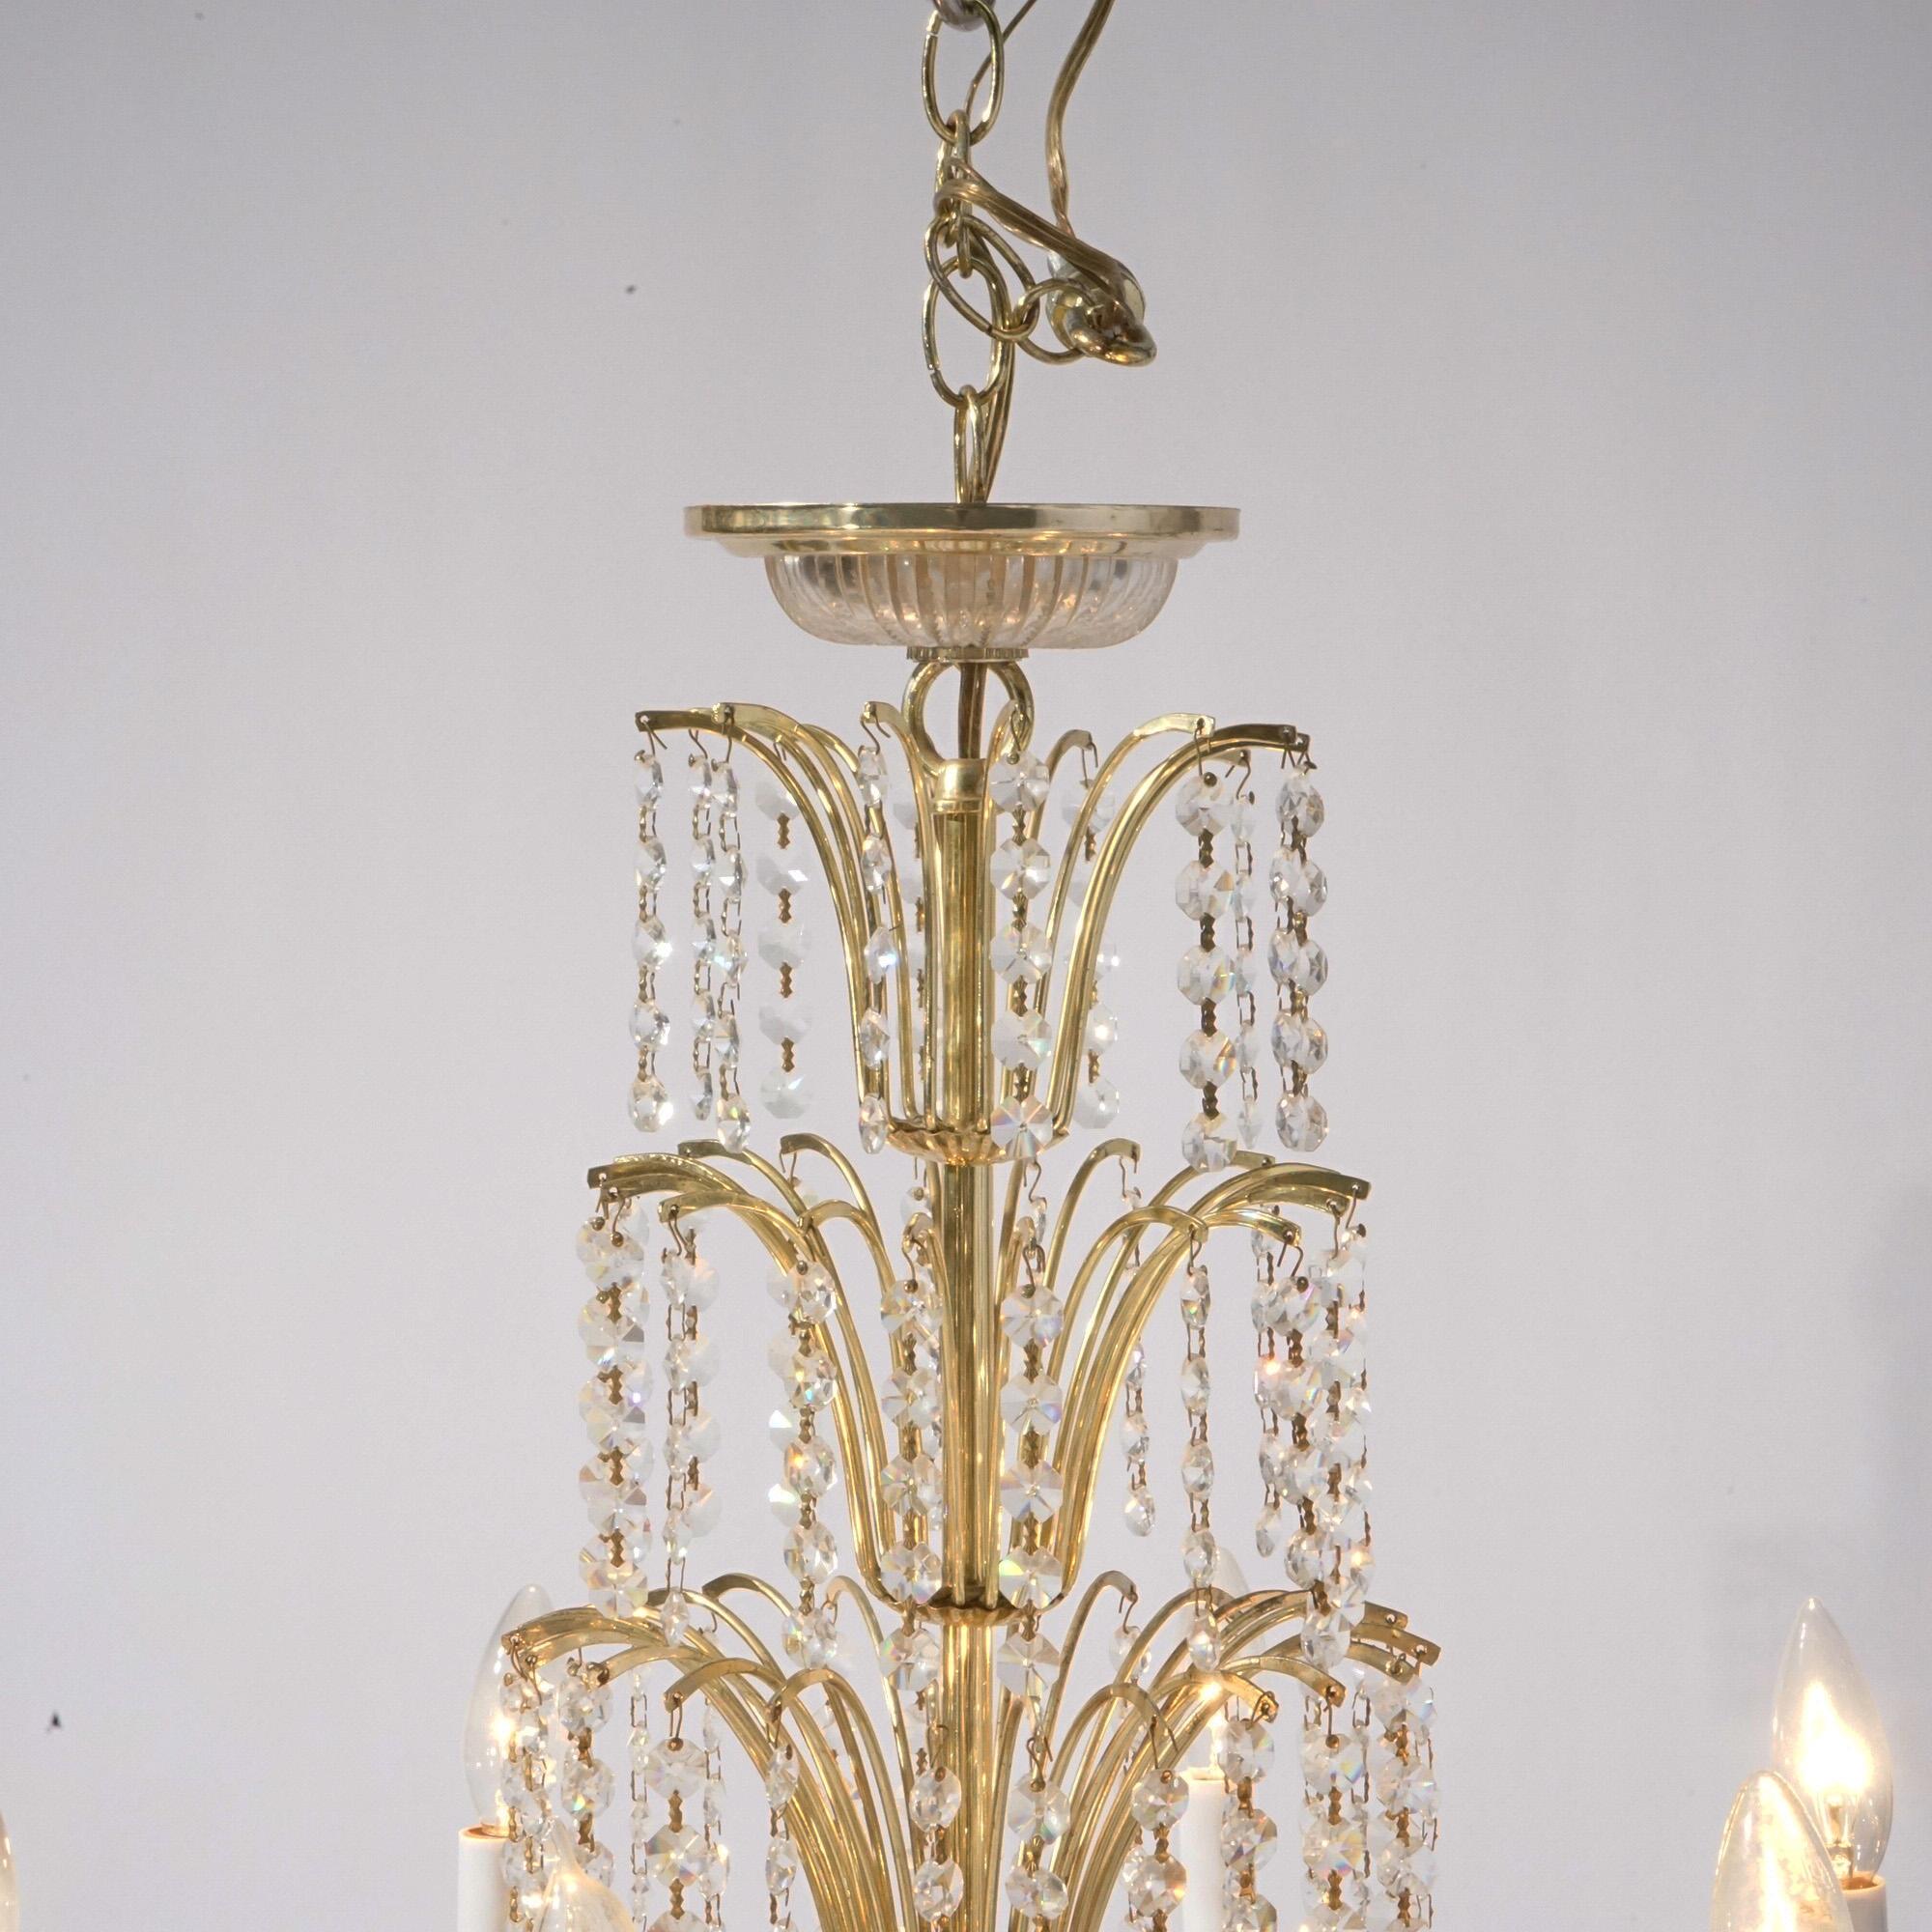 French Style Brass & Crystal Tiered Prism Chandelier 20th C For Sale 4